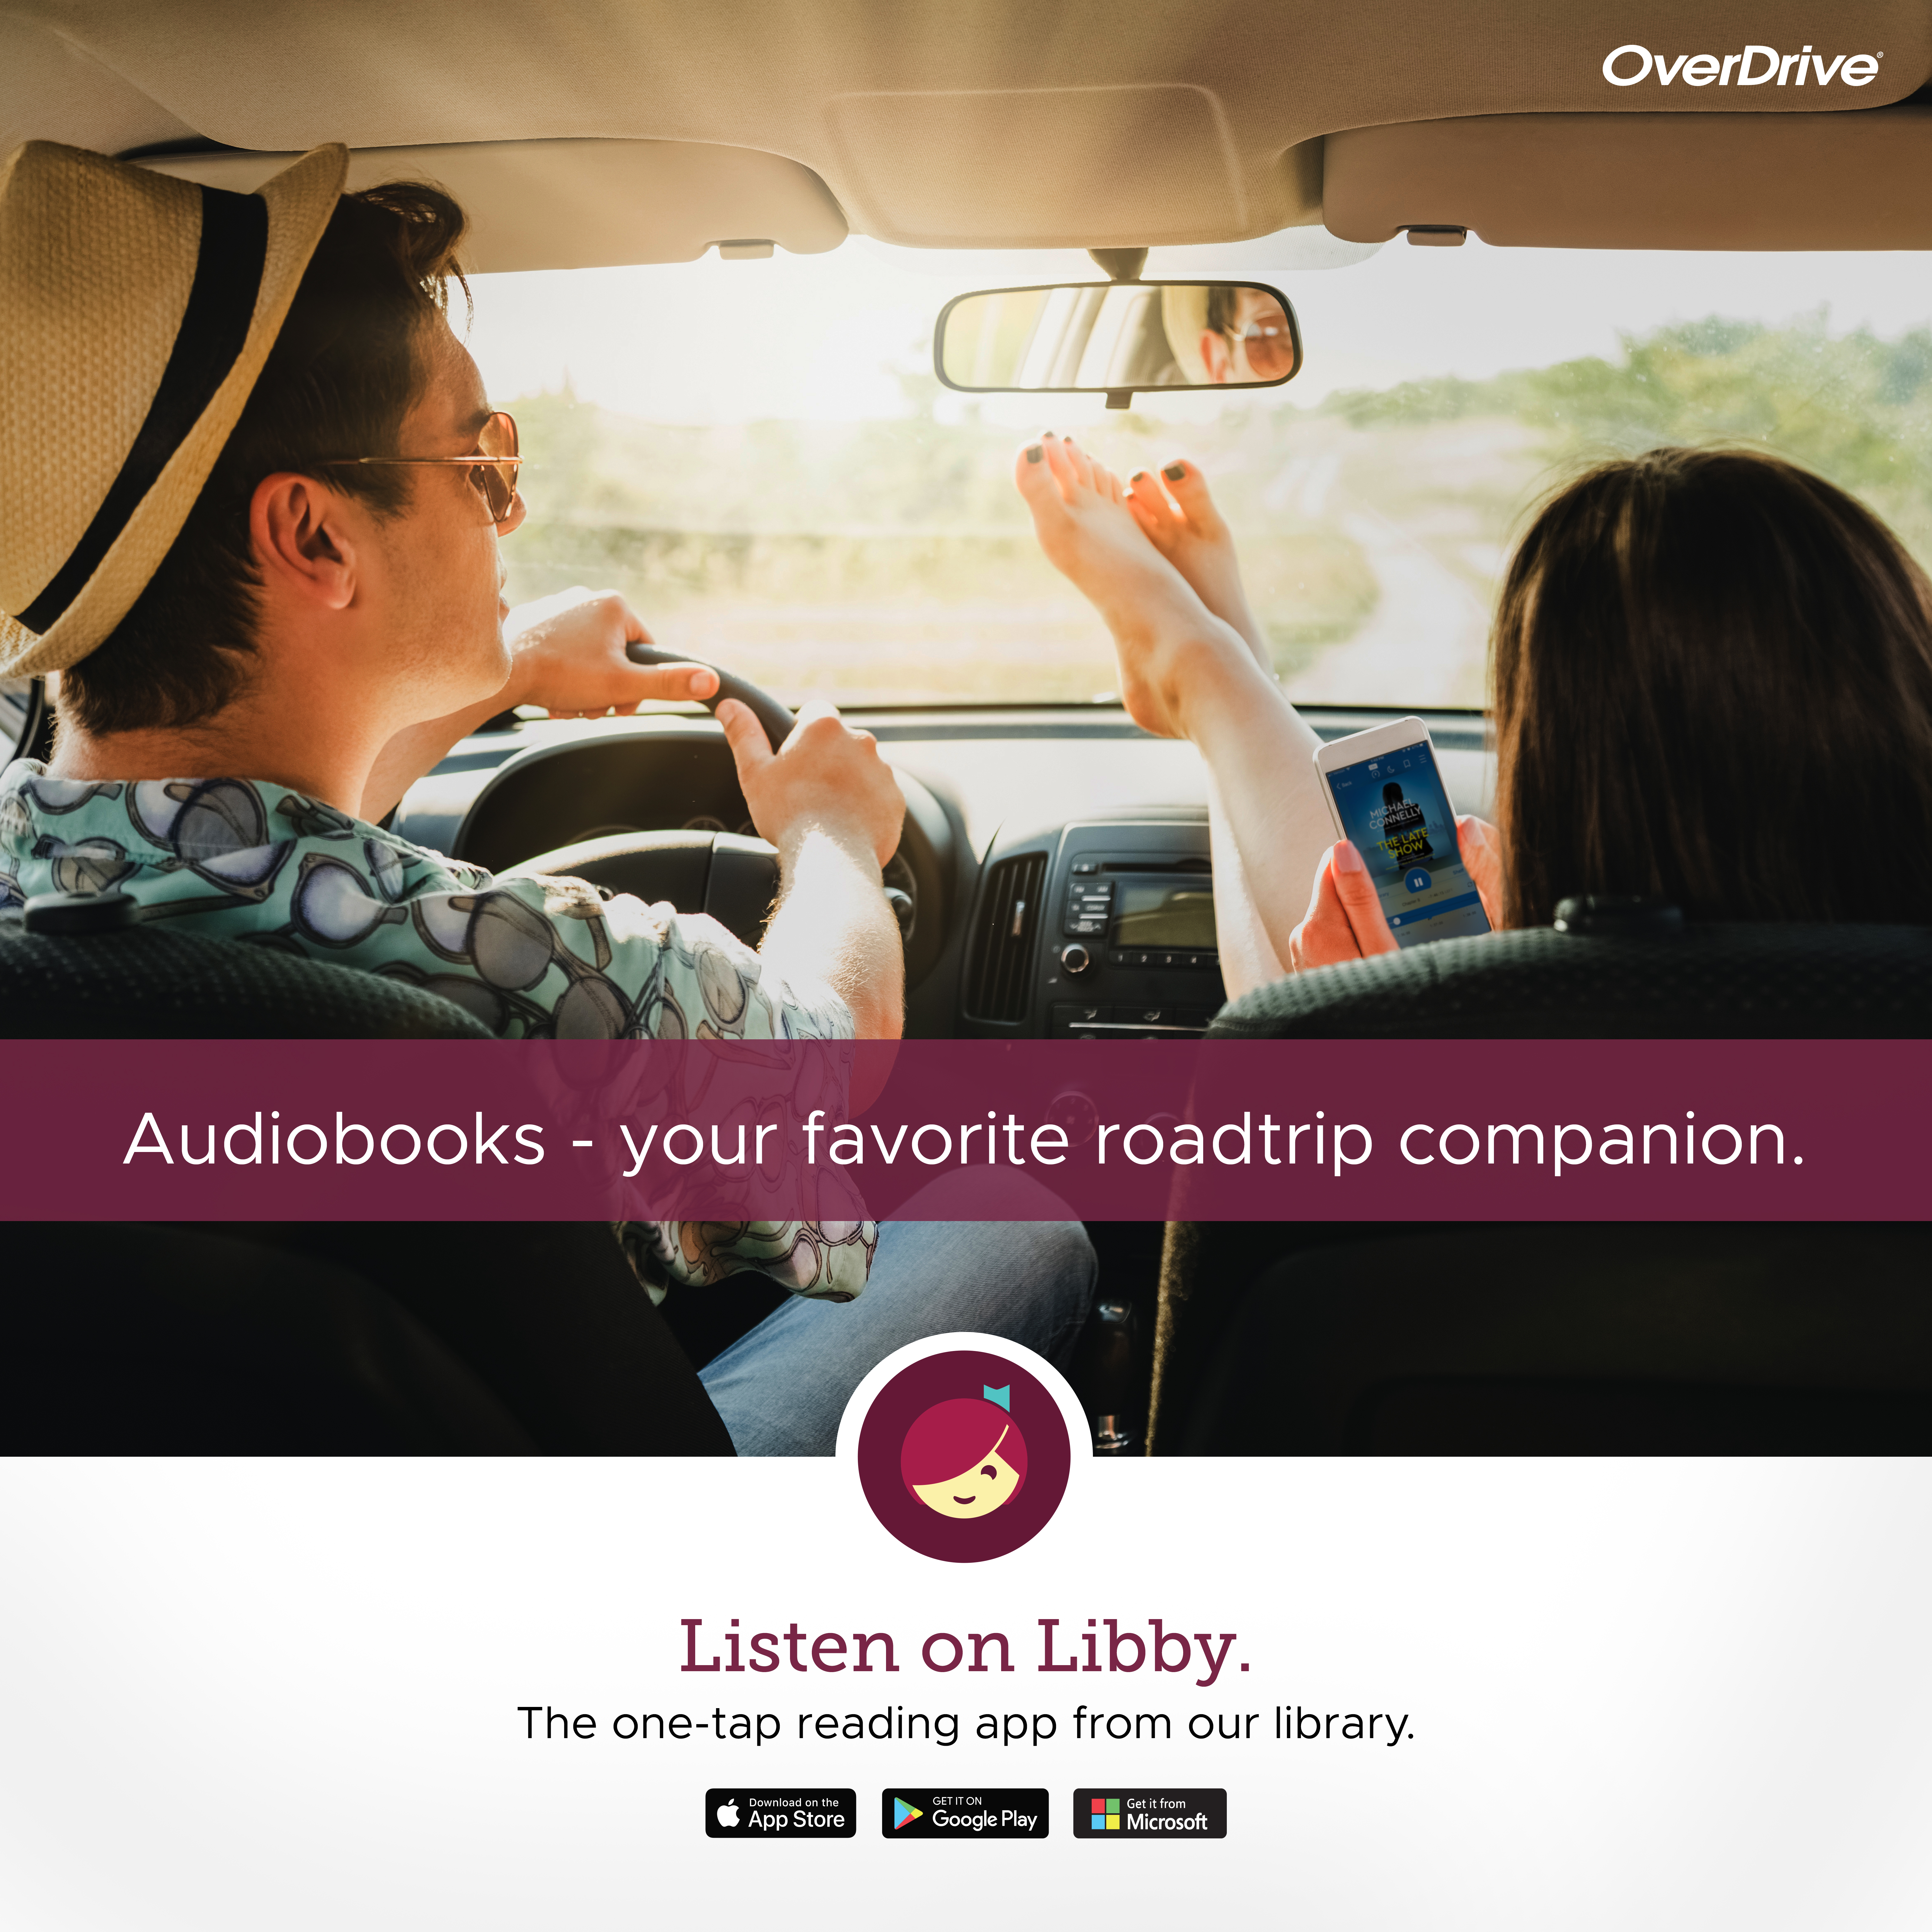 image with people driving holding up a phone with audiobook playing and text 